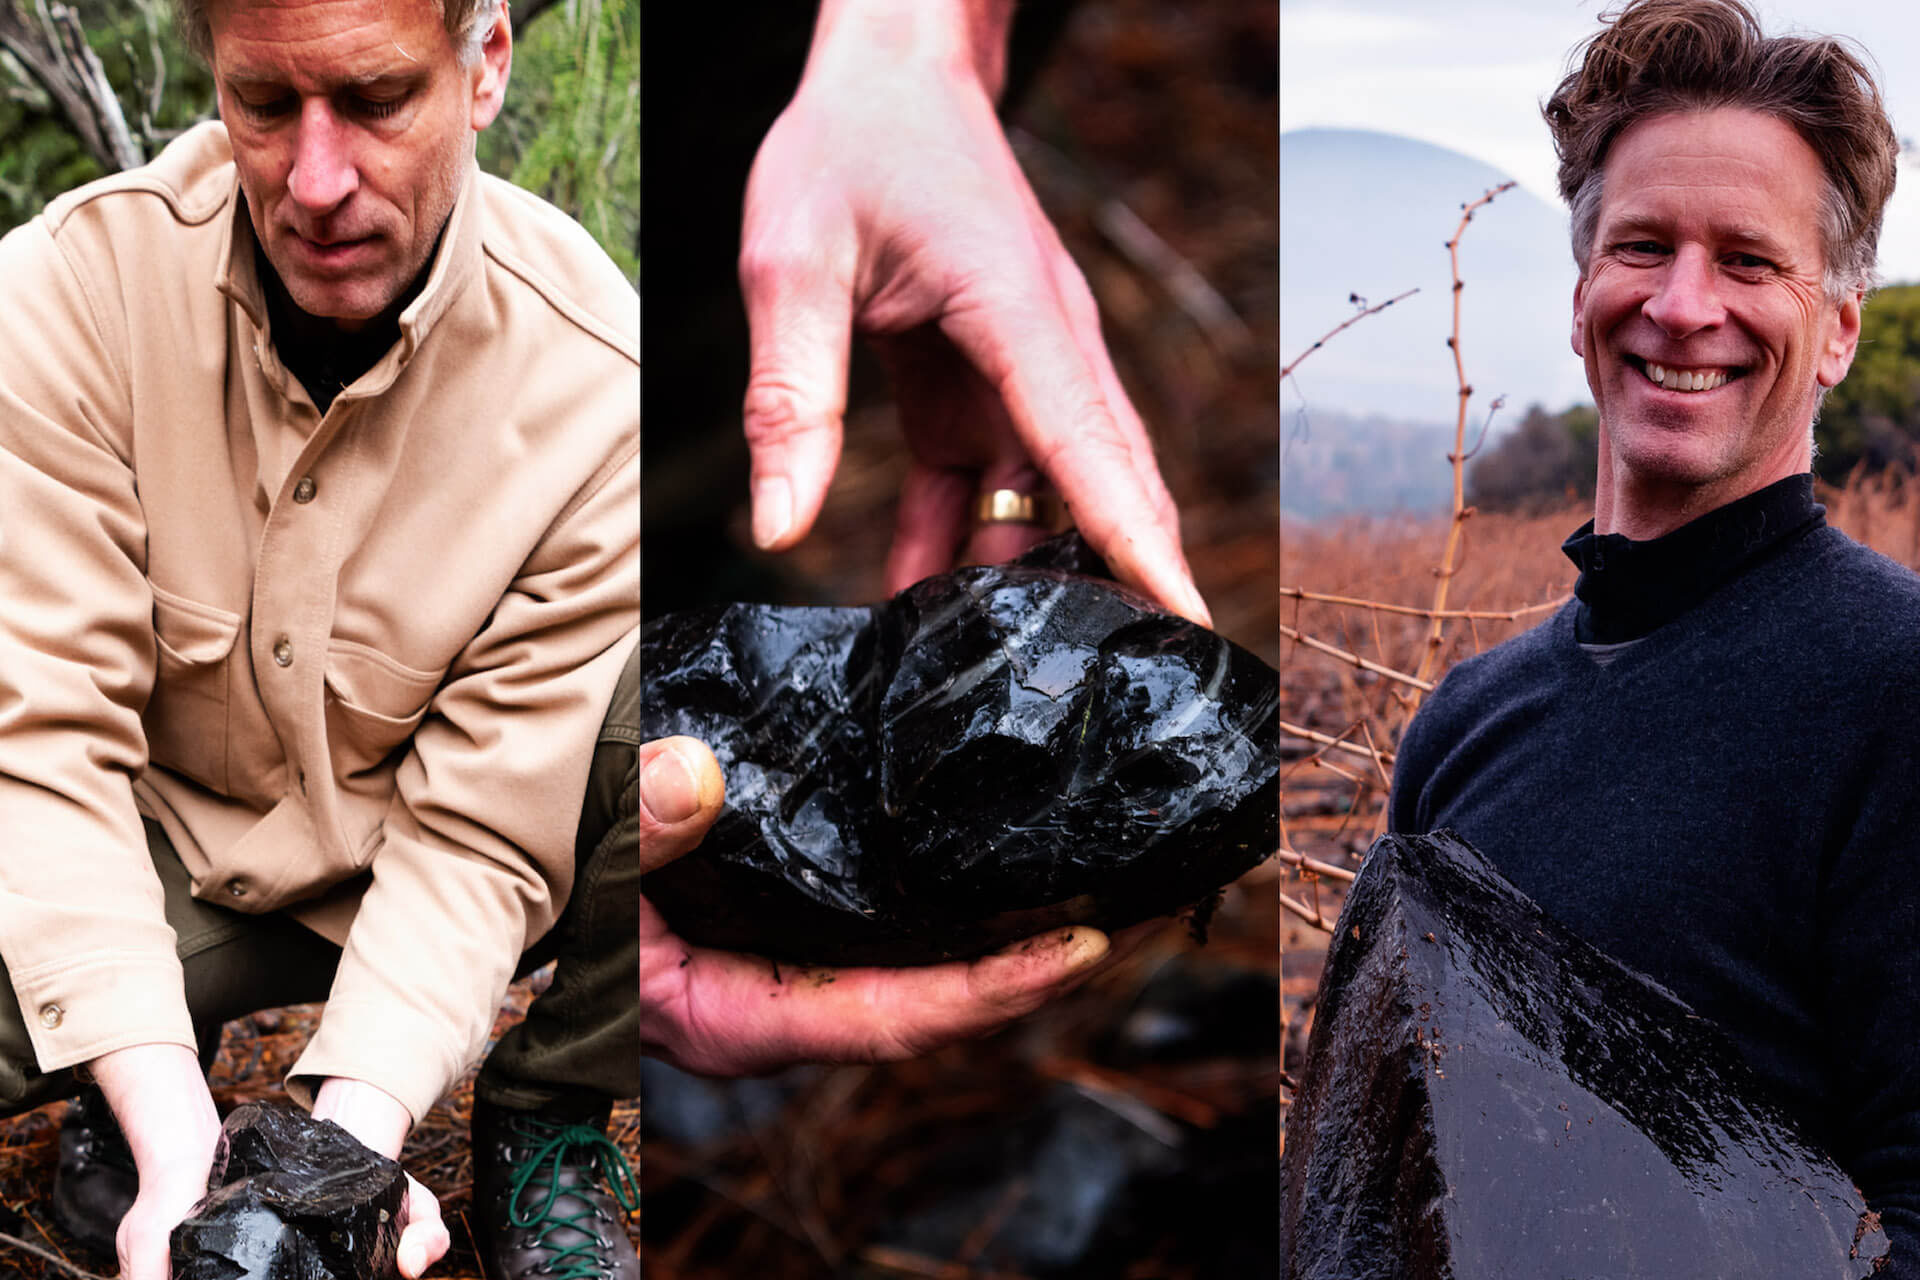 The Producers Behind California’s Volcanic Wines